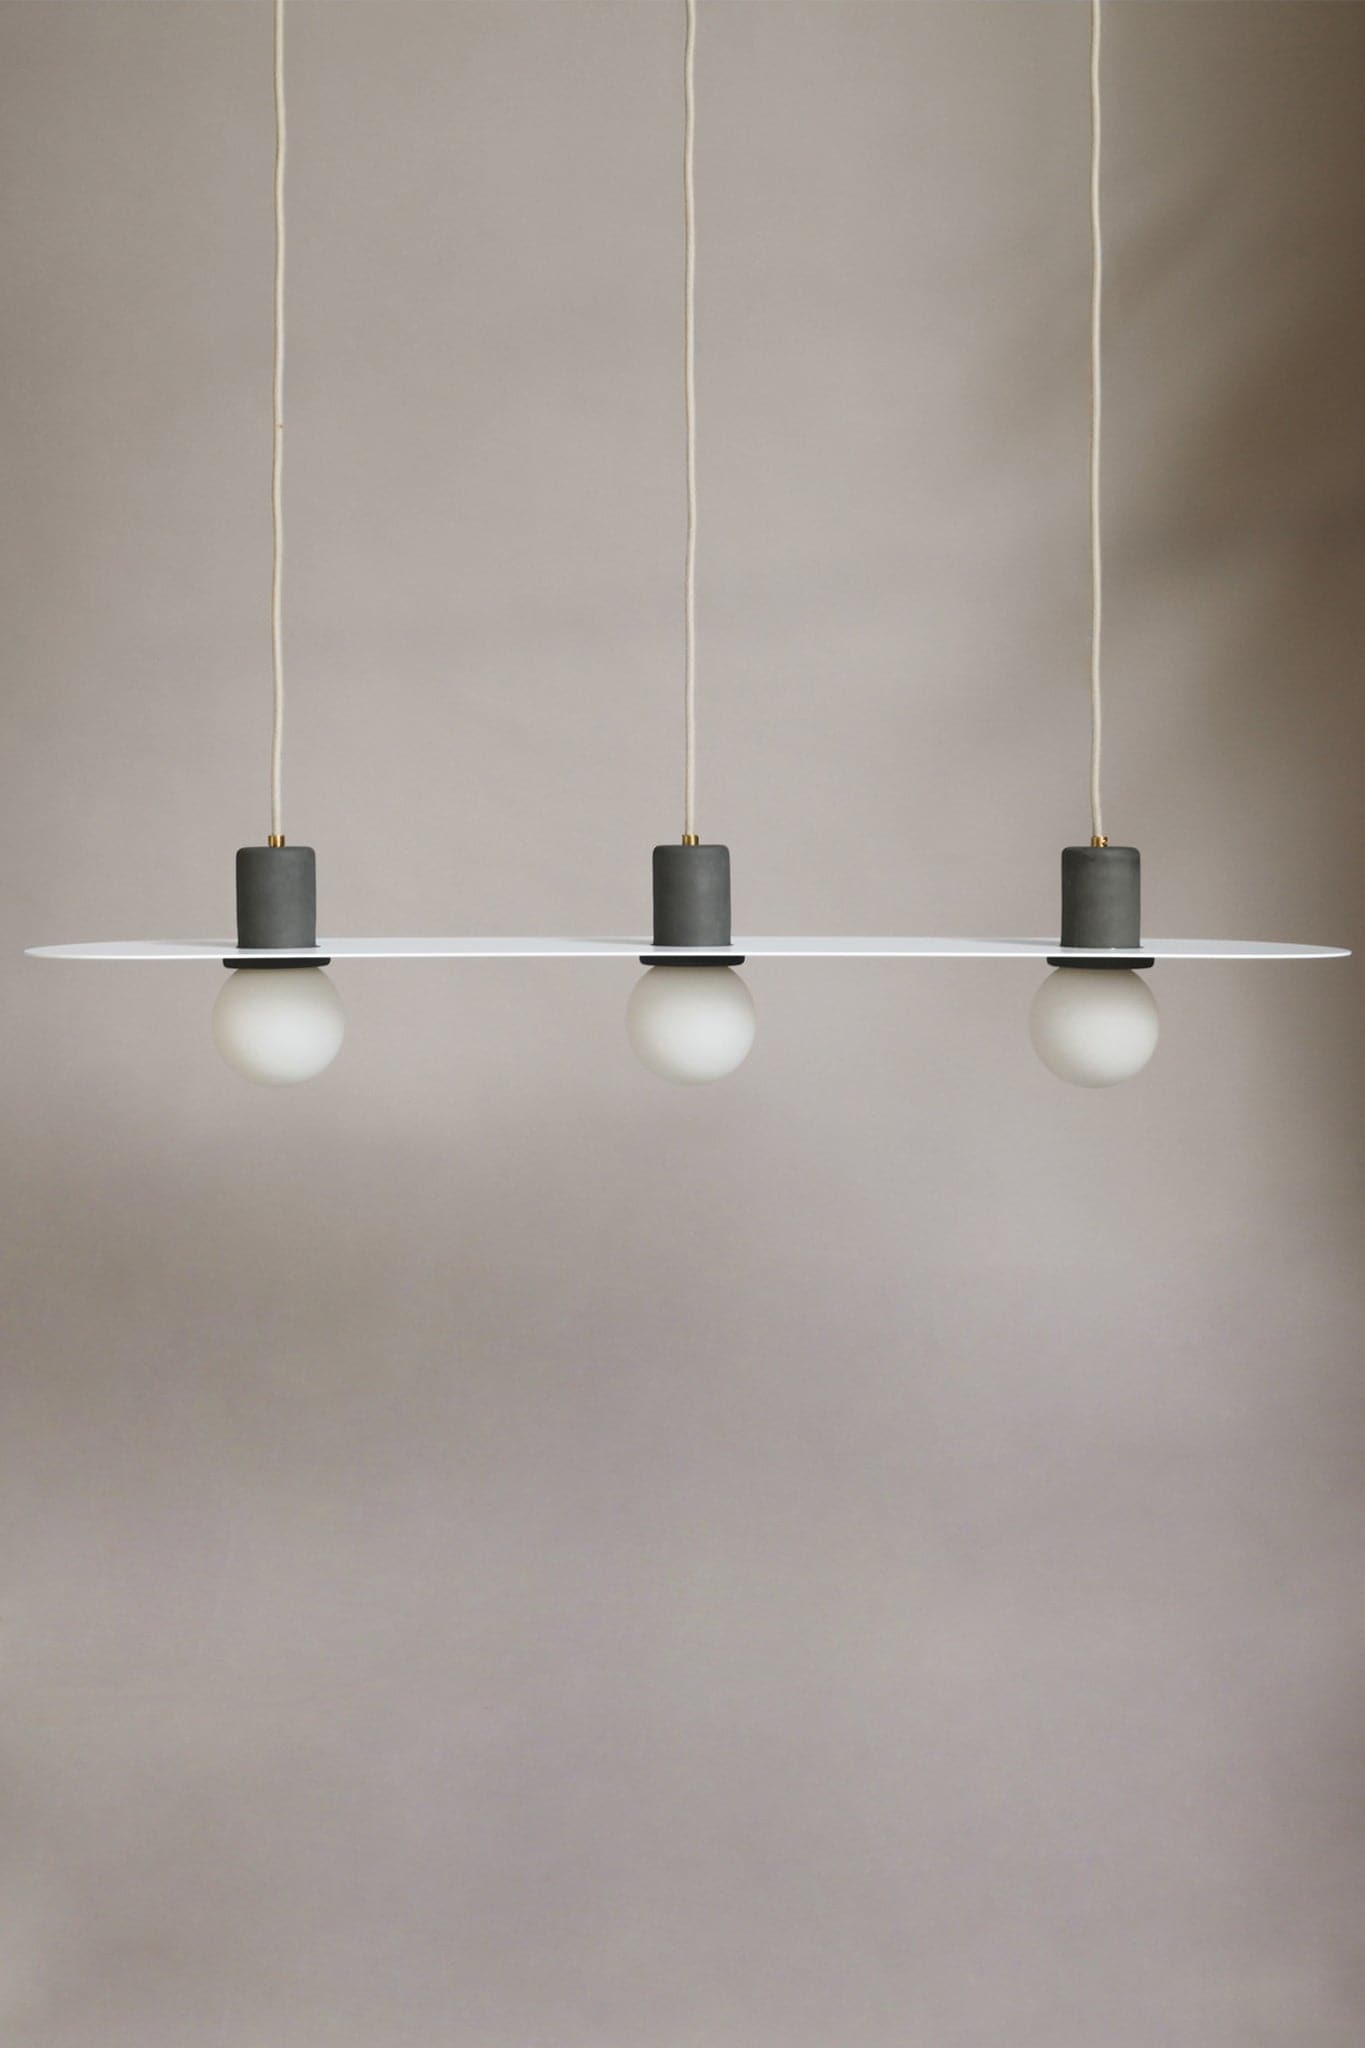 Marz Designs Feature Lighting - Lune Pendant Light in Slate/Brushed Brass